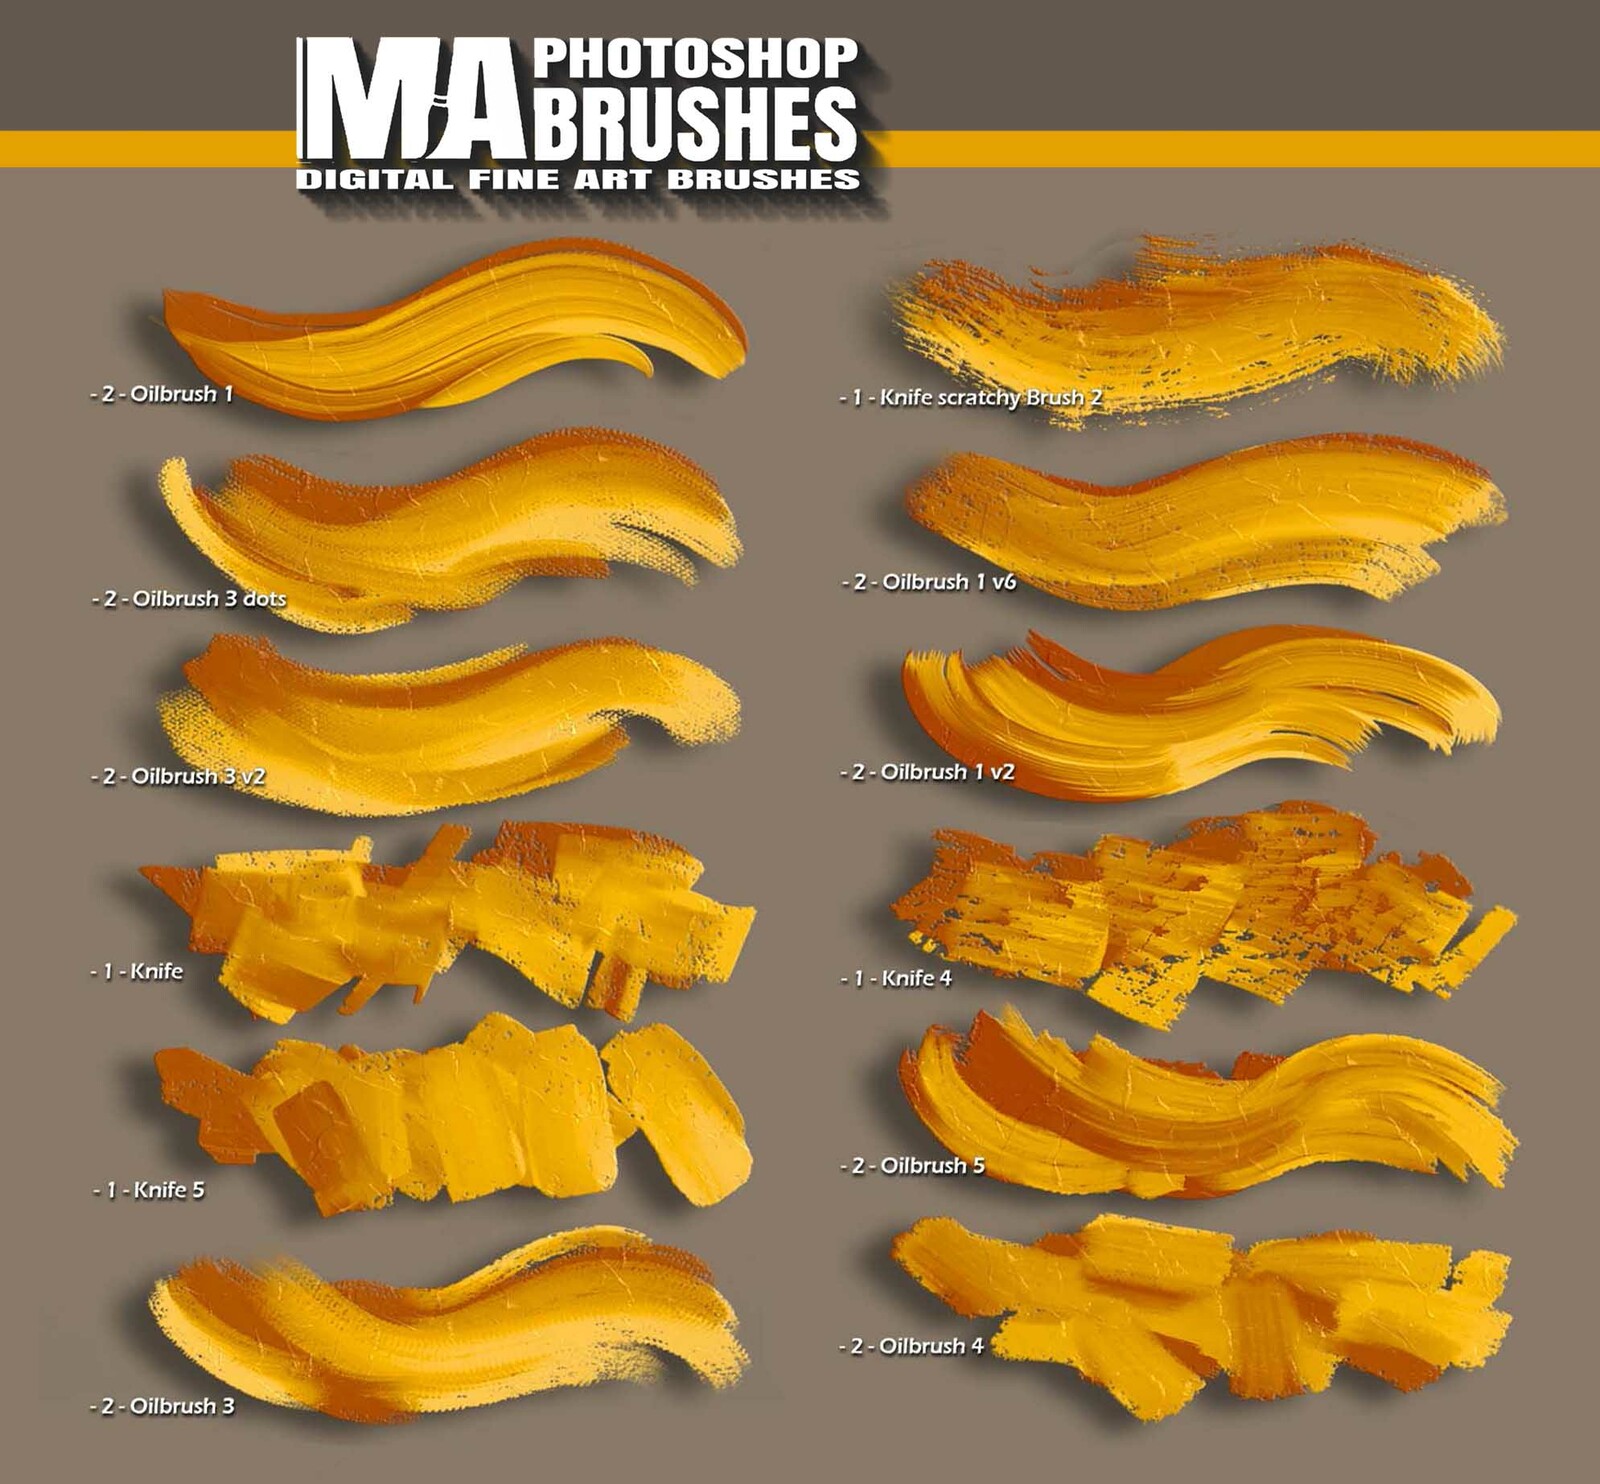 MA-BRUSHES - Most Realistic Photoshop Brushes with Oil Texture!